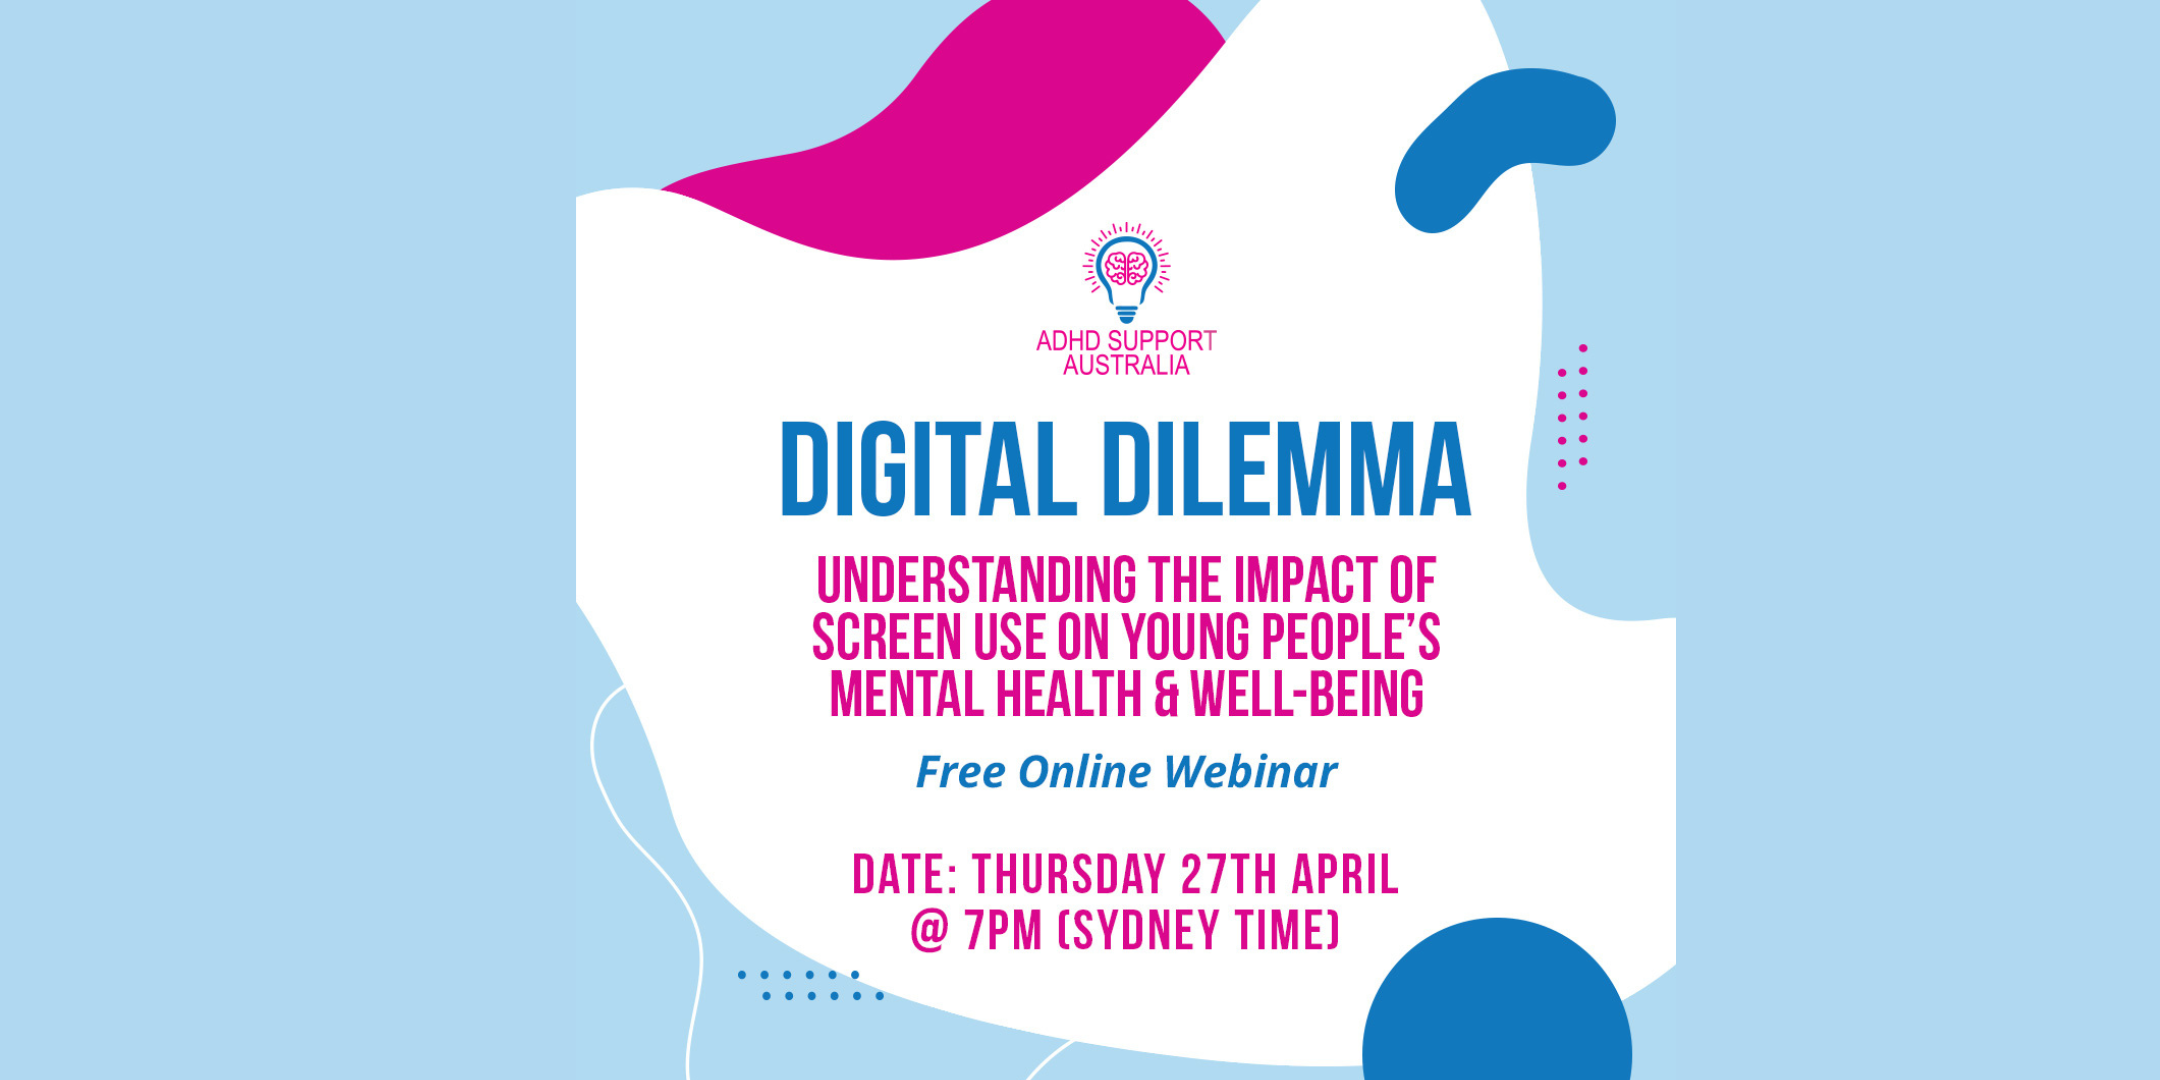 Poster for Digital Dilemma Understanding the Impact of Screen Use on Young People's Mental Health & Well-being Free Online Webinar. Happening on April 27 Thursday at 7pm Sydney Time